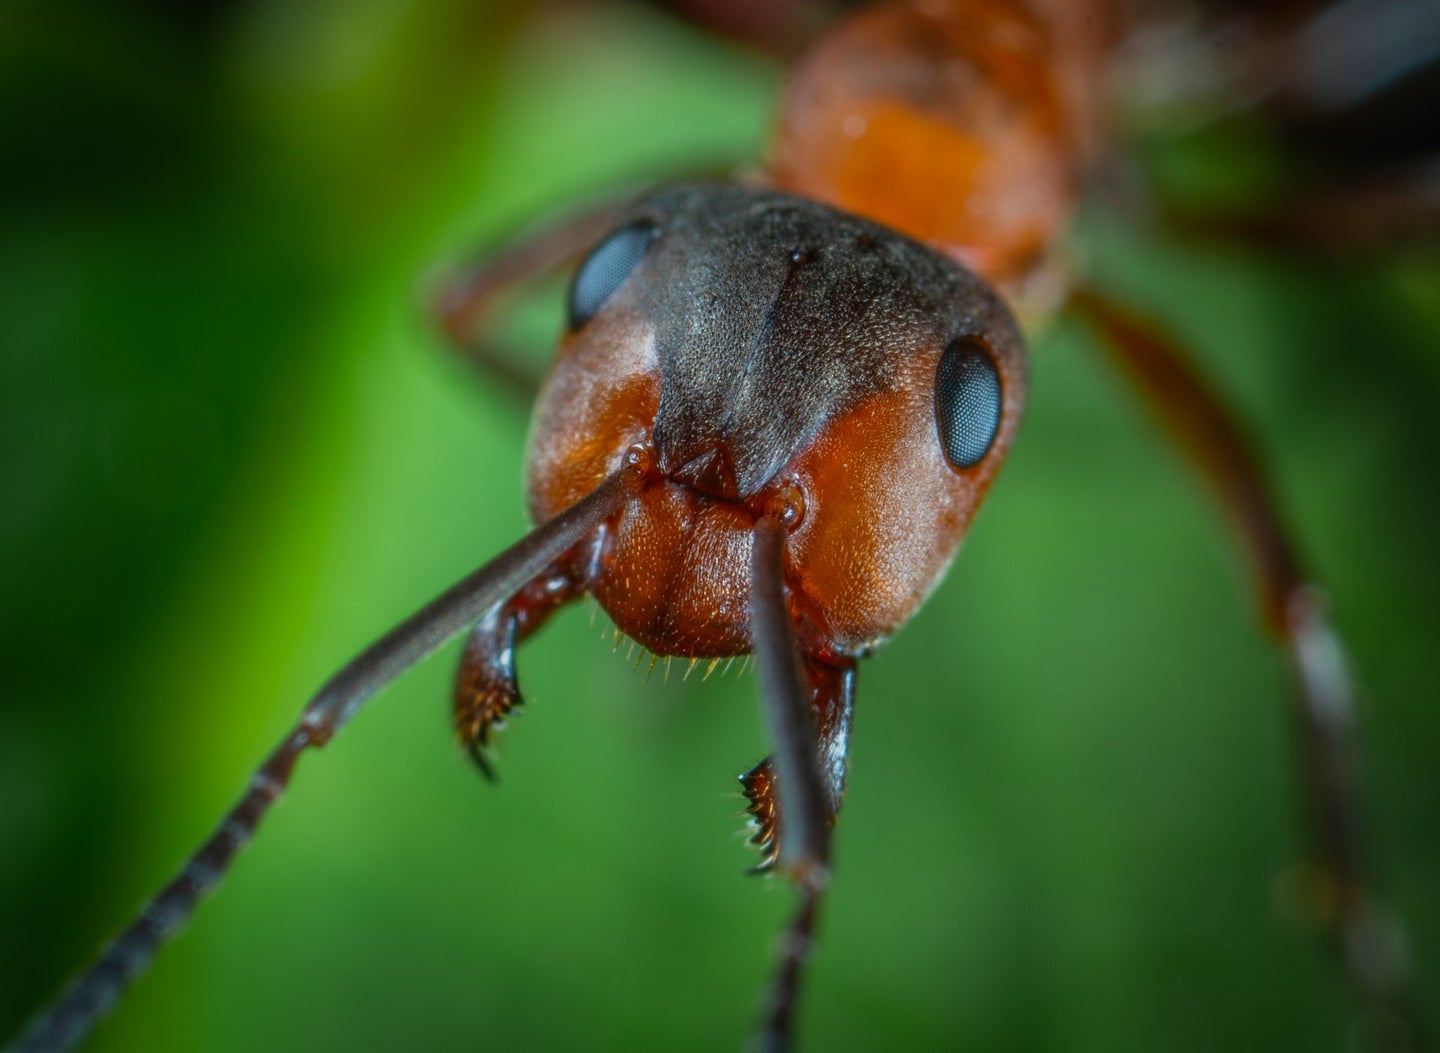 One of the estimated 20 quadrillion ants on Earth.